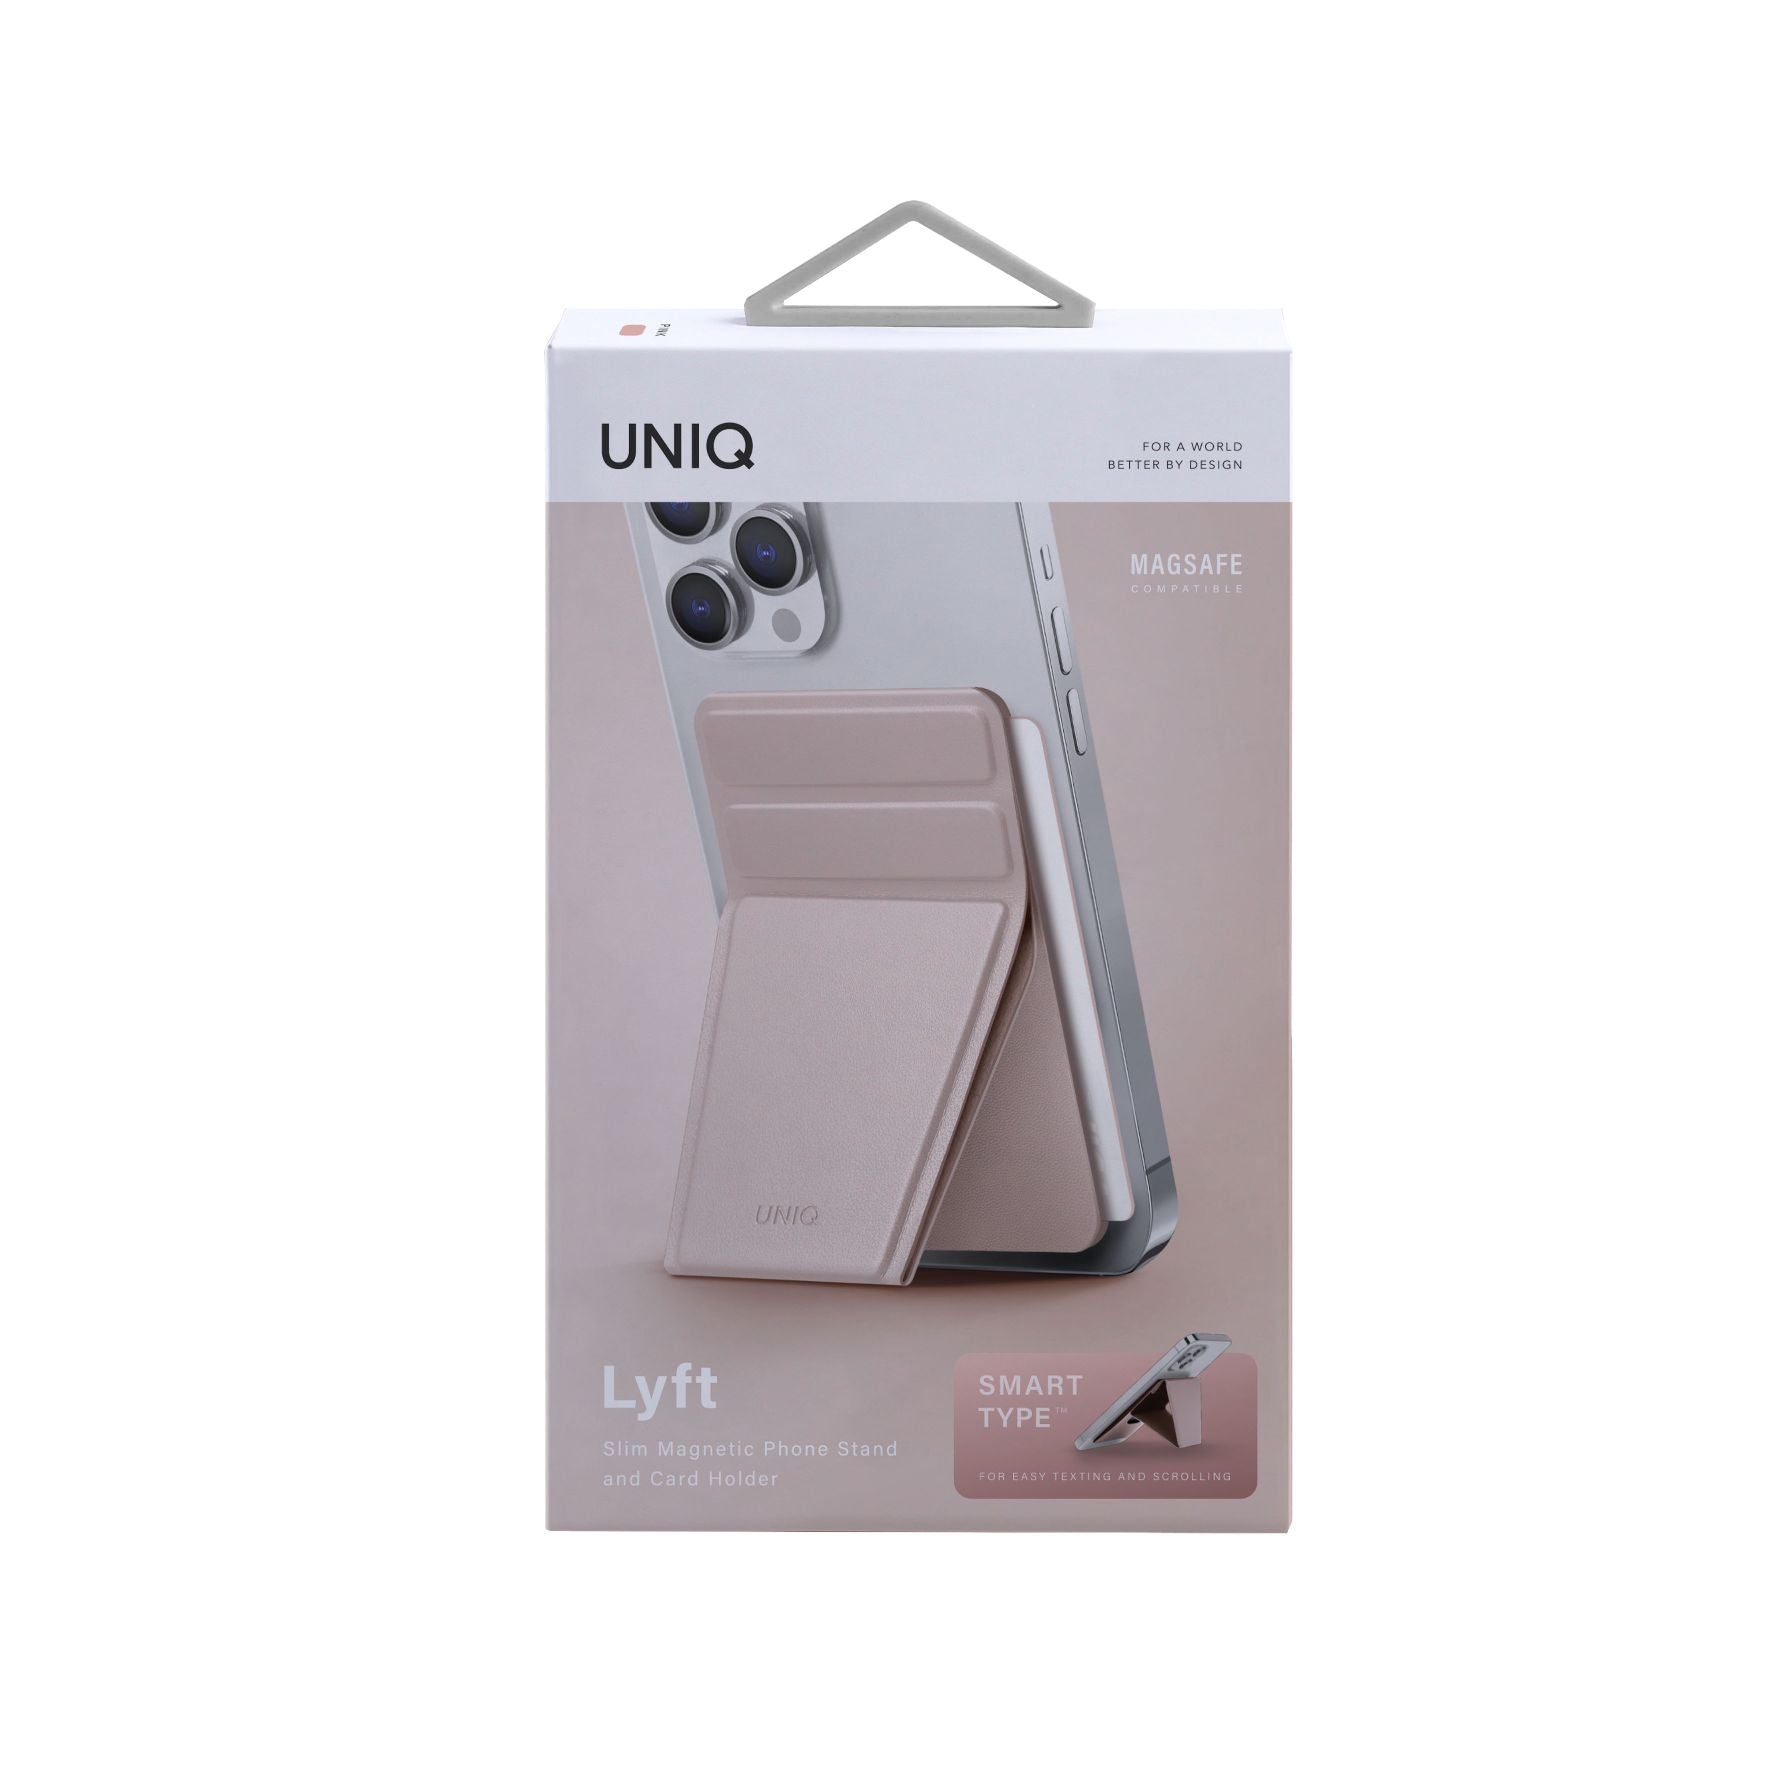 Uniq Lyft Slim Magnetic Phone Stand / Grip and Card Holder Case - Pink